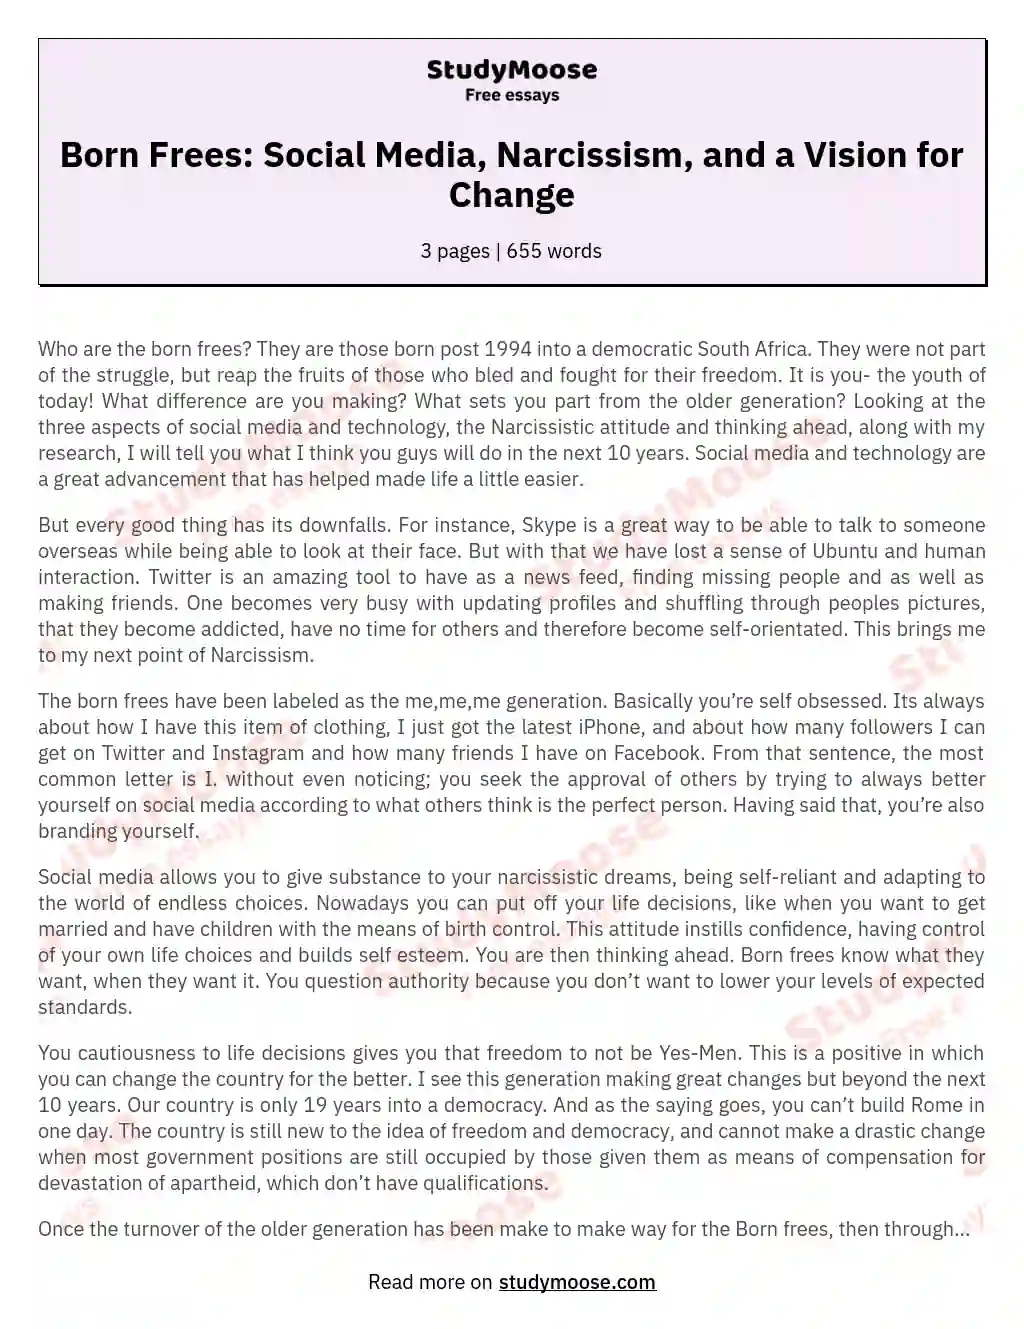 Born Frees: Social Media, Narcissism, and a Vision for Change essay